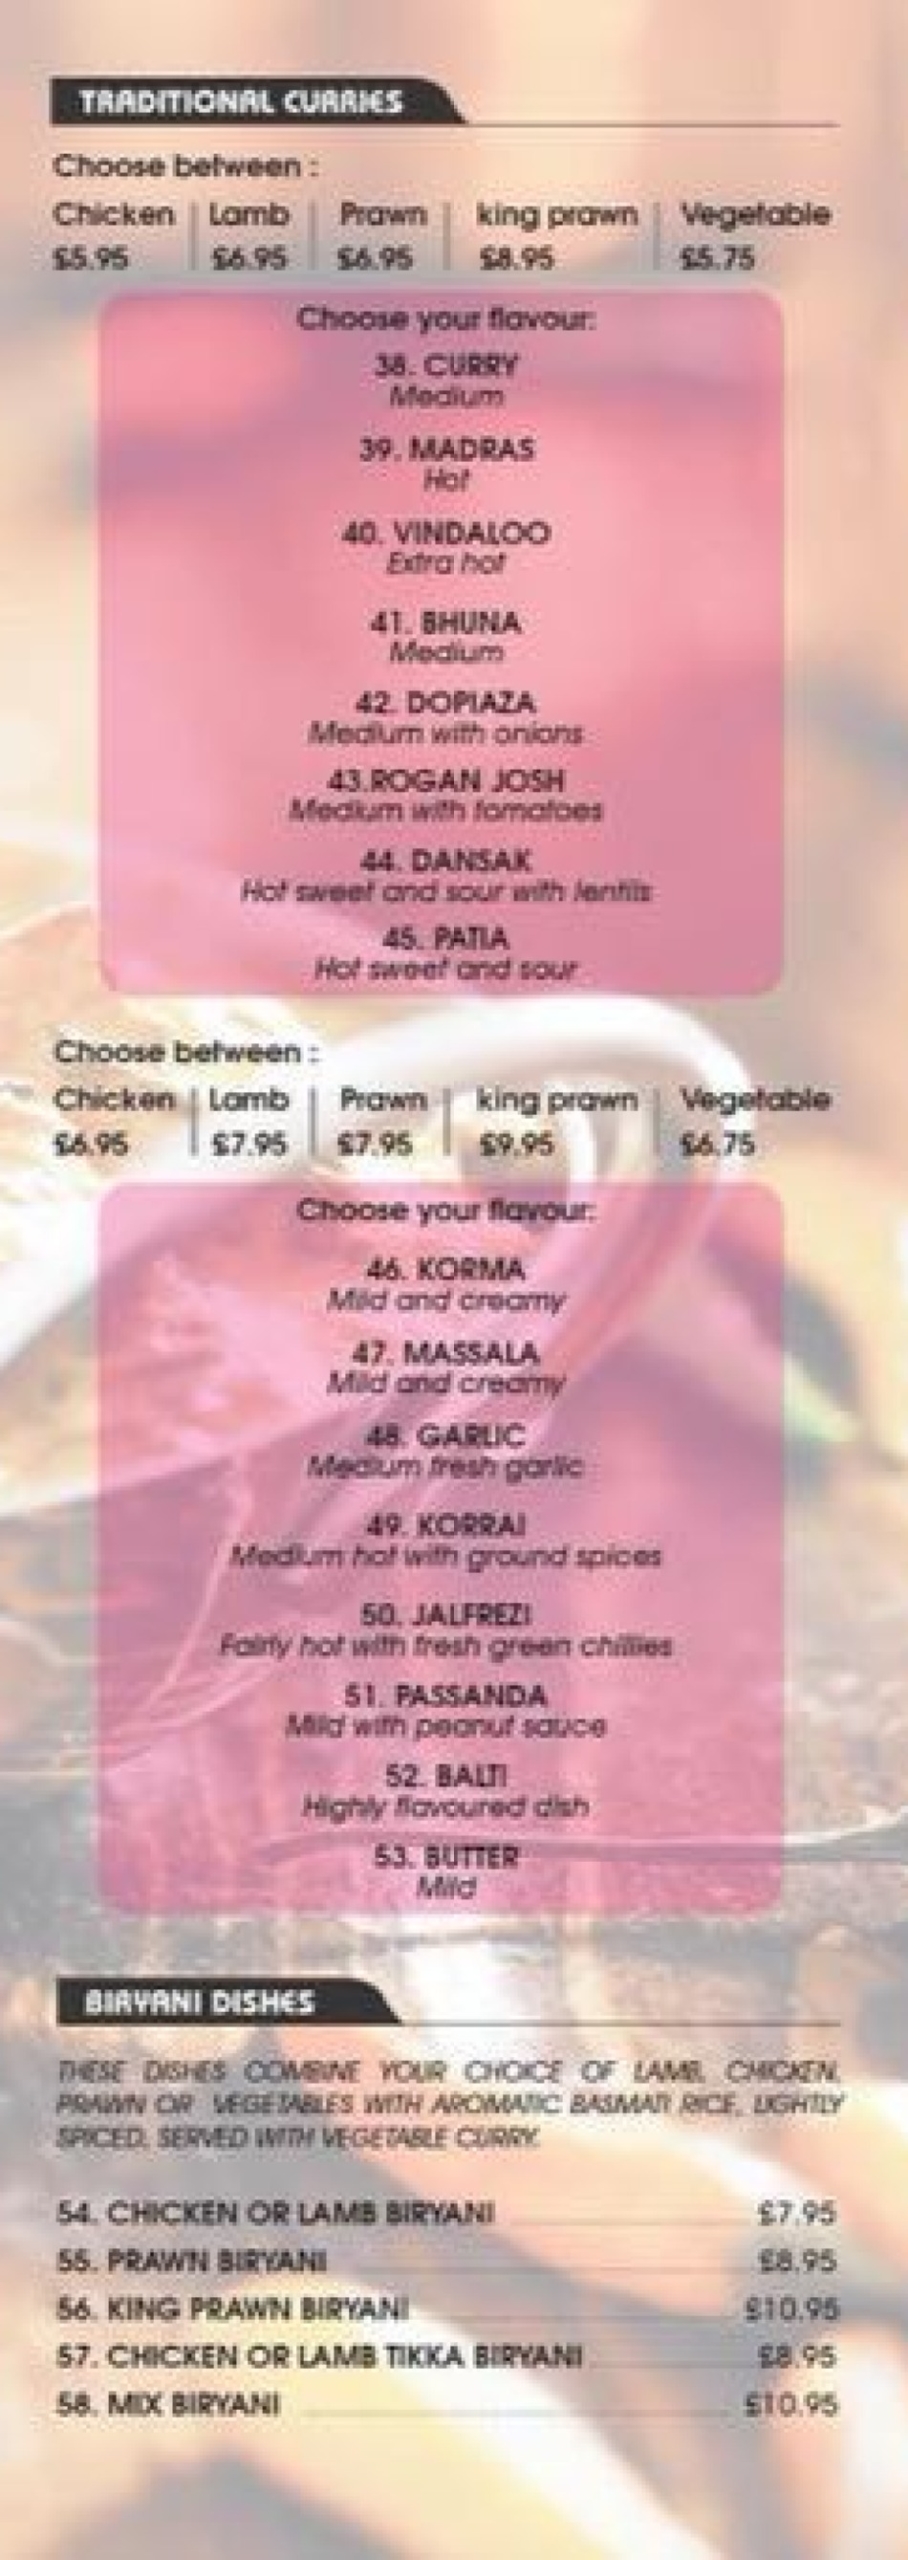 Takeaway Restaurant Menu Page - The New Bengal Indian Takeaway - Andover